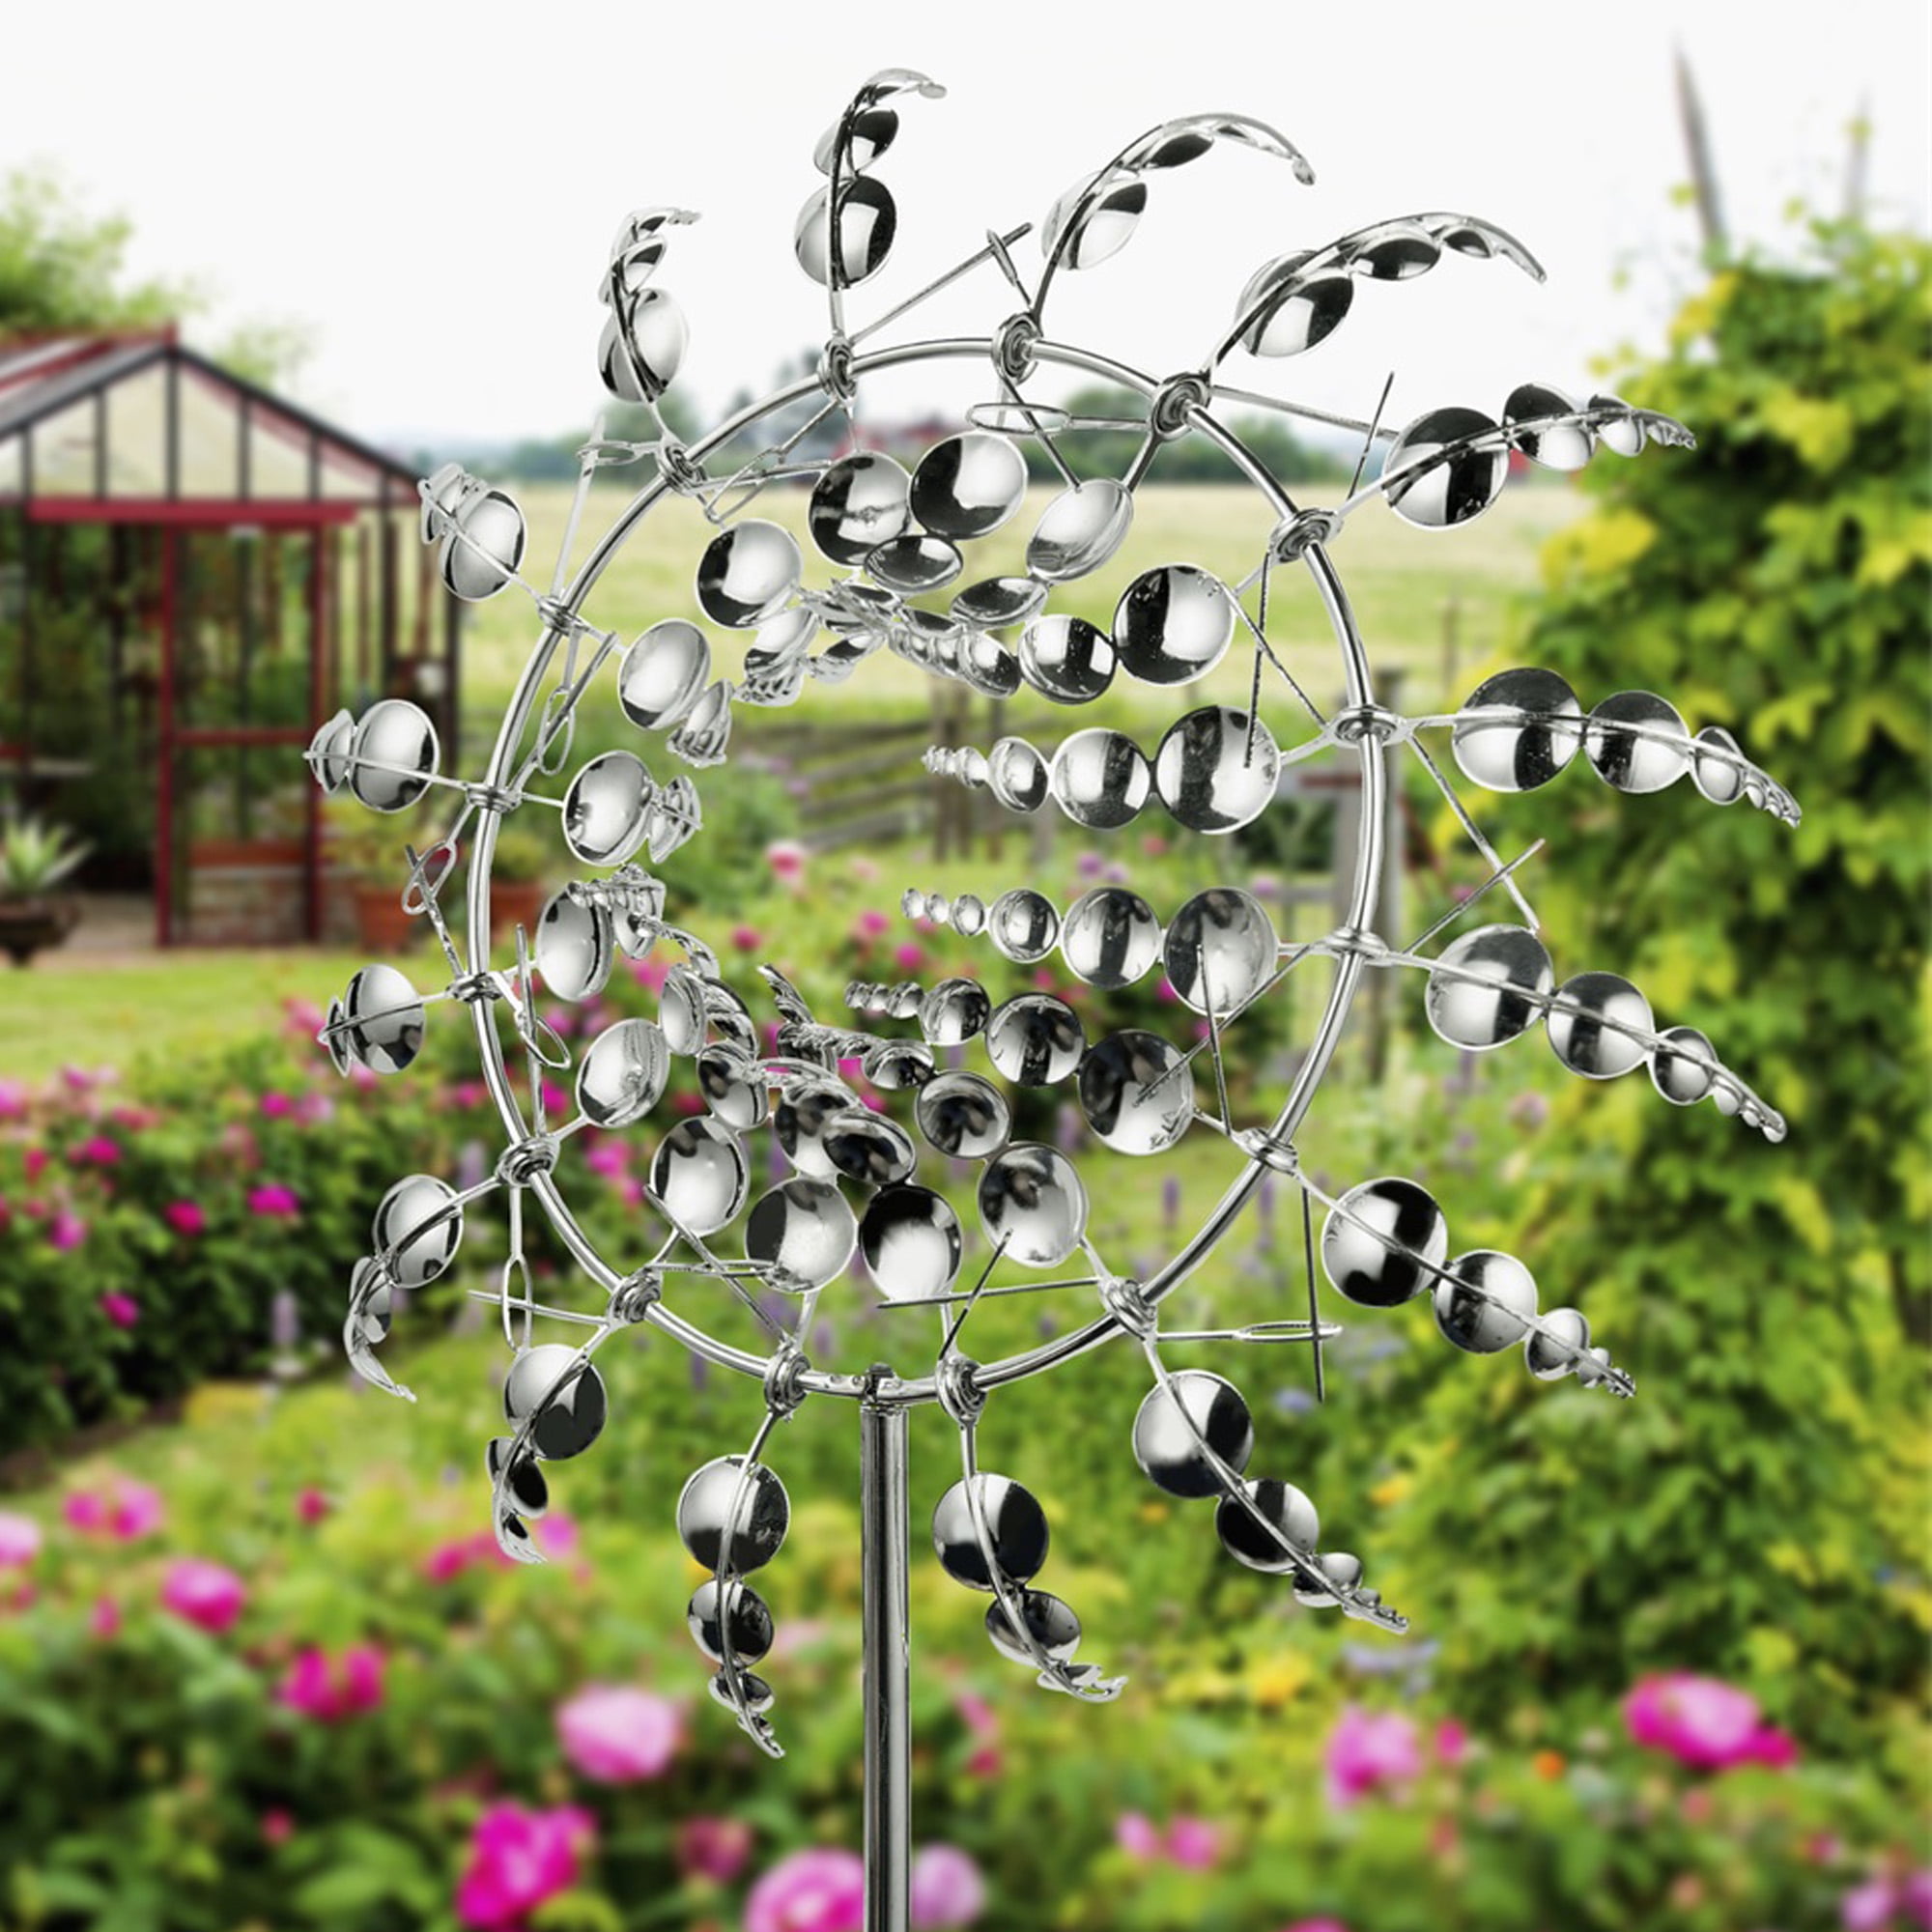 3D Wind Powered Kinetic Sculpture Christmas Decorations Wind Catchers Metal Outdoor Patio Decoration 23.6in Wind Sculptures Lawn Wind Spinners for Yard and Garden Unique Metal Windmill 